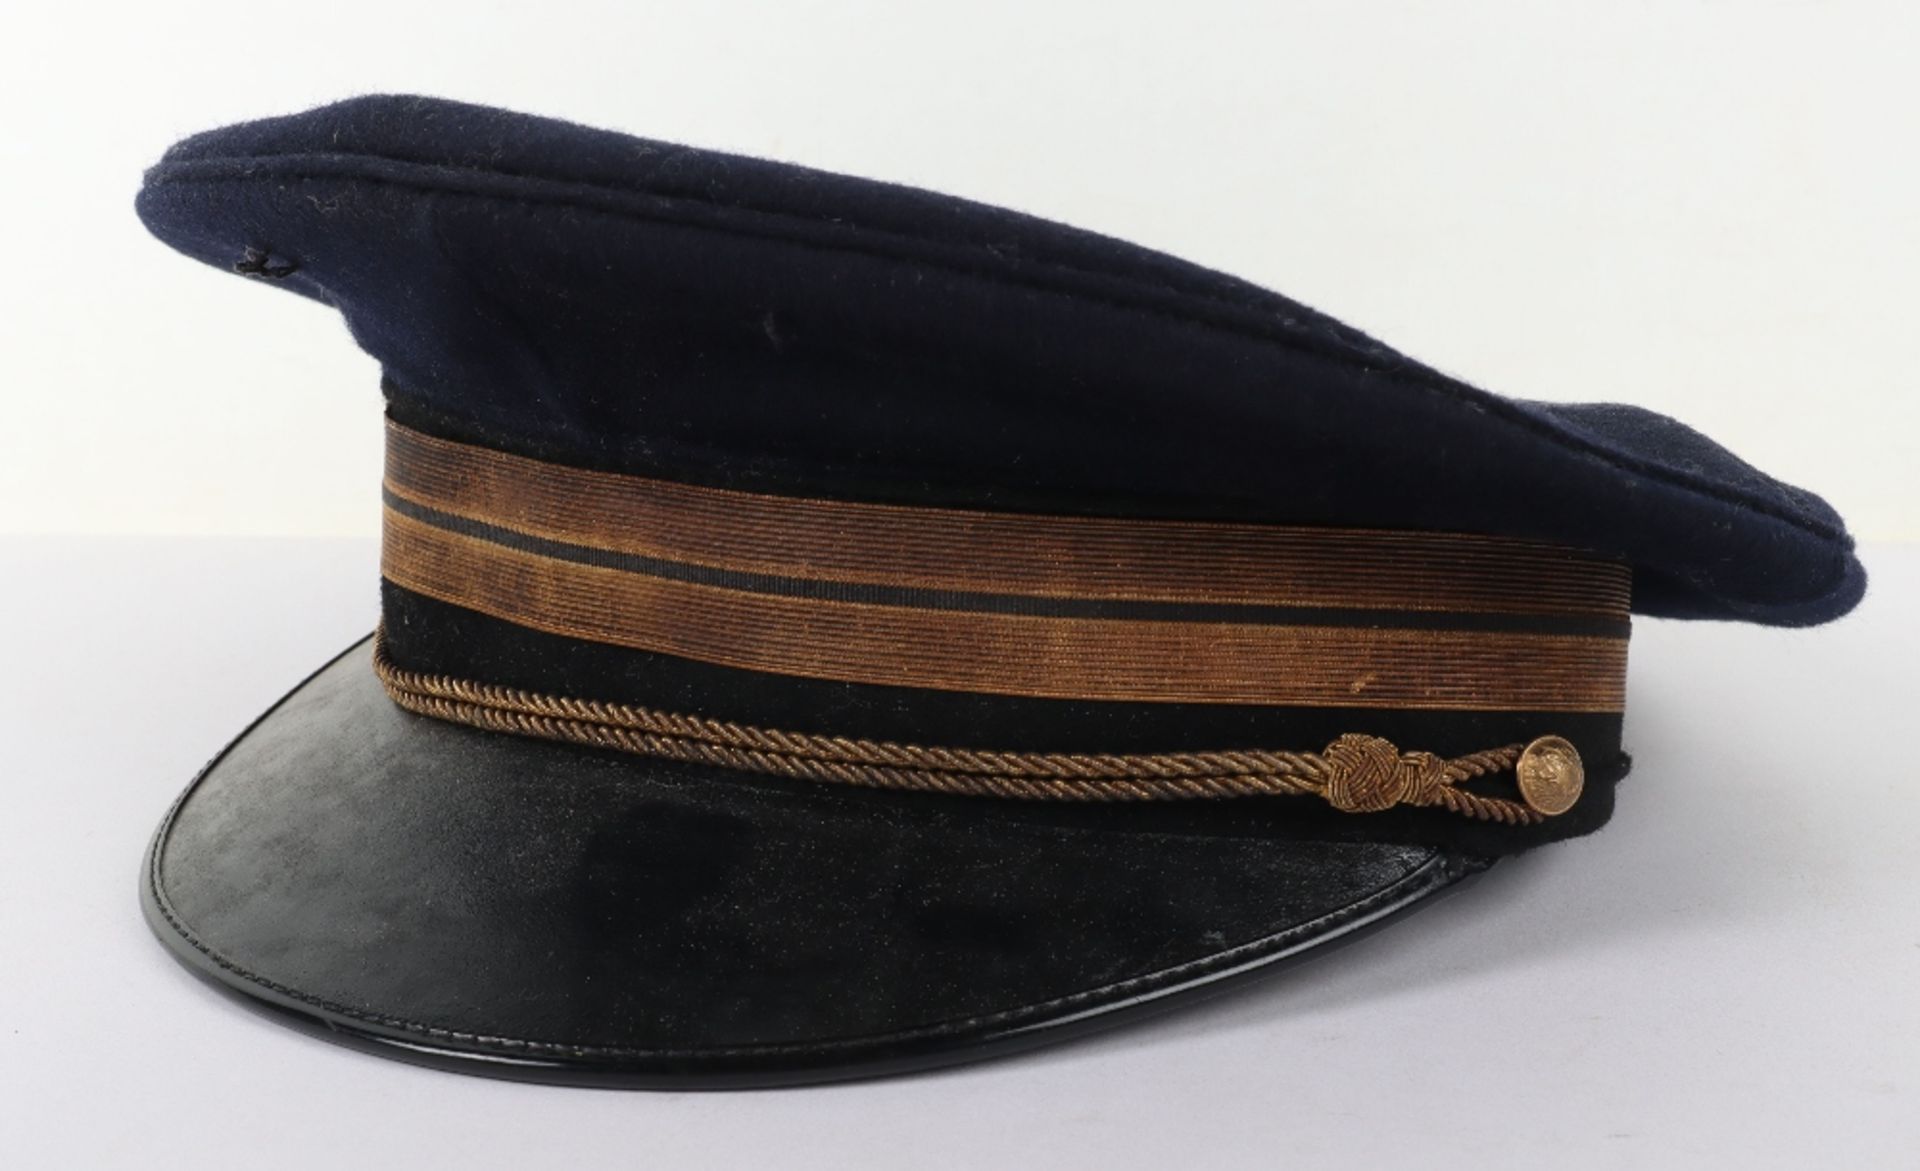 French Airforce Officers Peaked Cap - Image 3 of 7